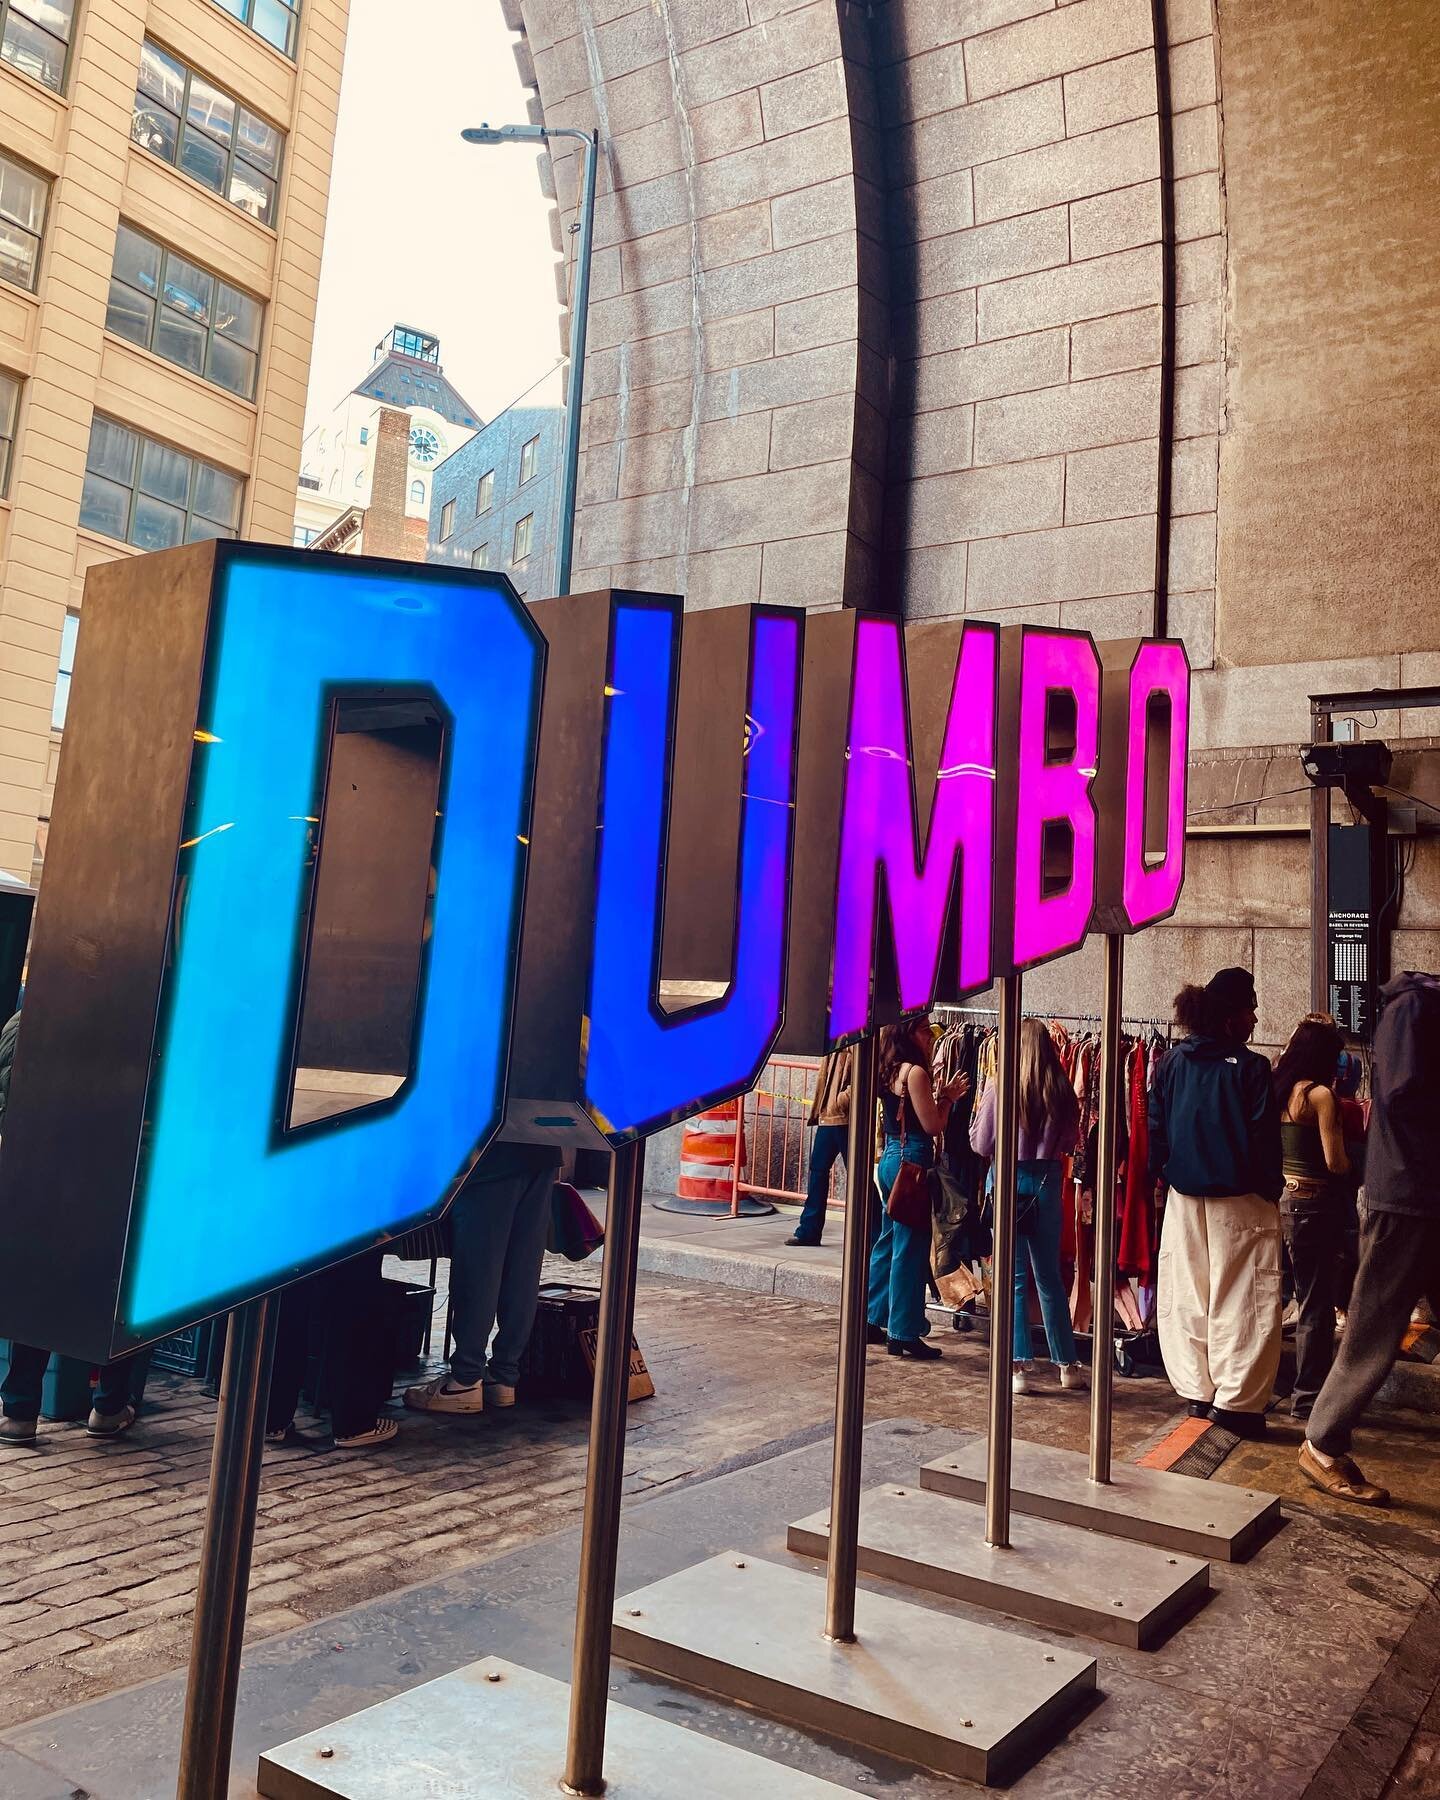 A side of DUMBO you&rsquo;ve never seen before🔎

From vintage clothing to unique home decor, this eclectic neighborhood market never disappoints ⚡️💎

 #thriftstorefinds #dumbobrooklyn #ecofriendlyfashion